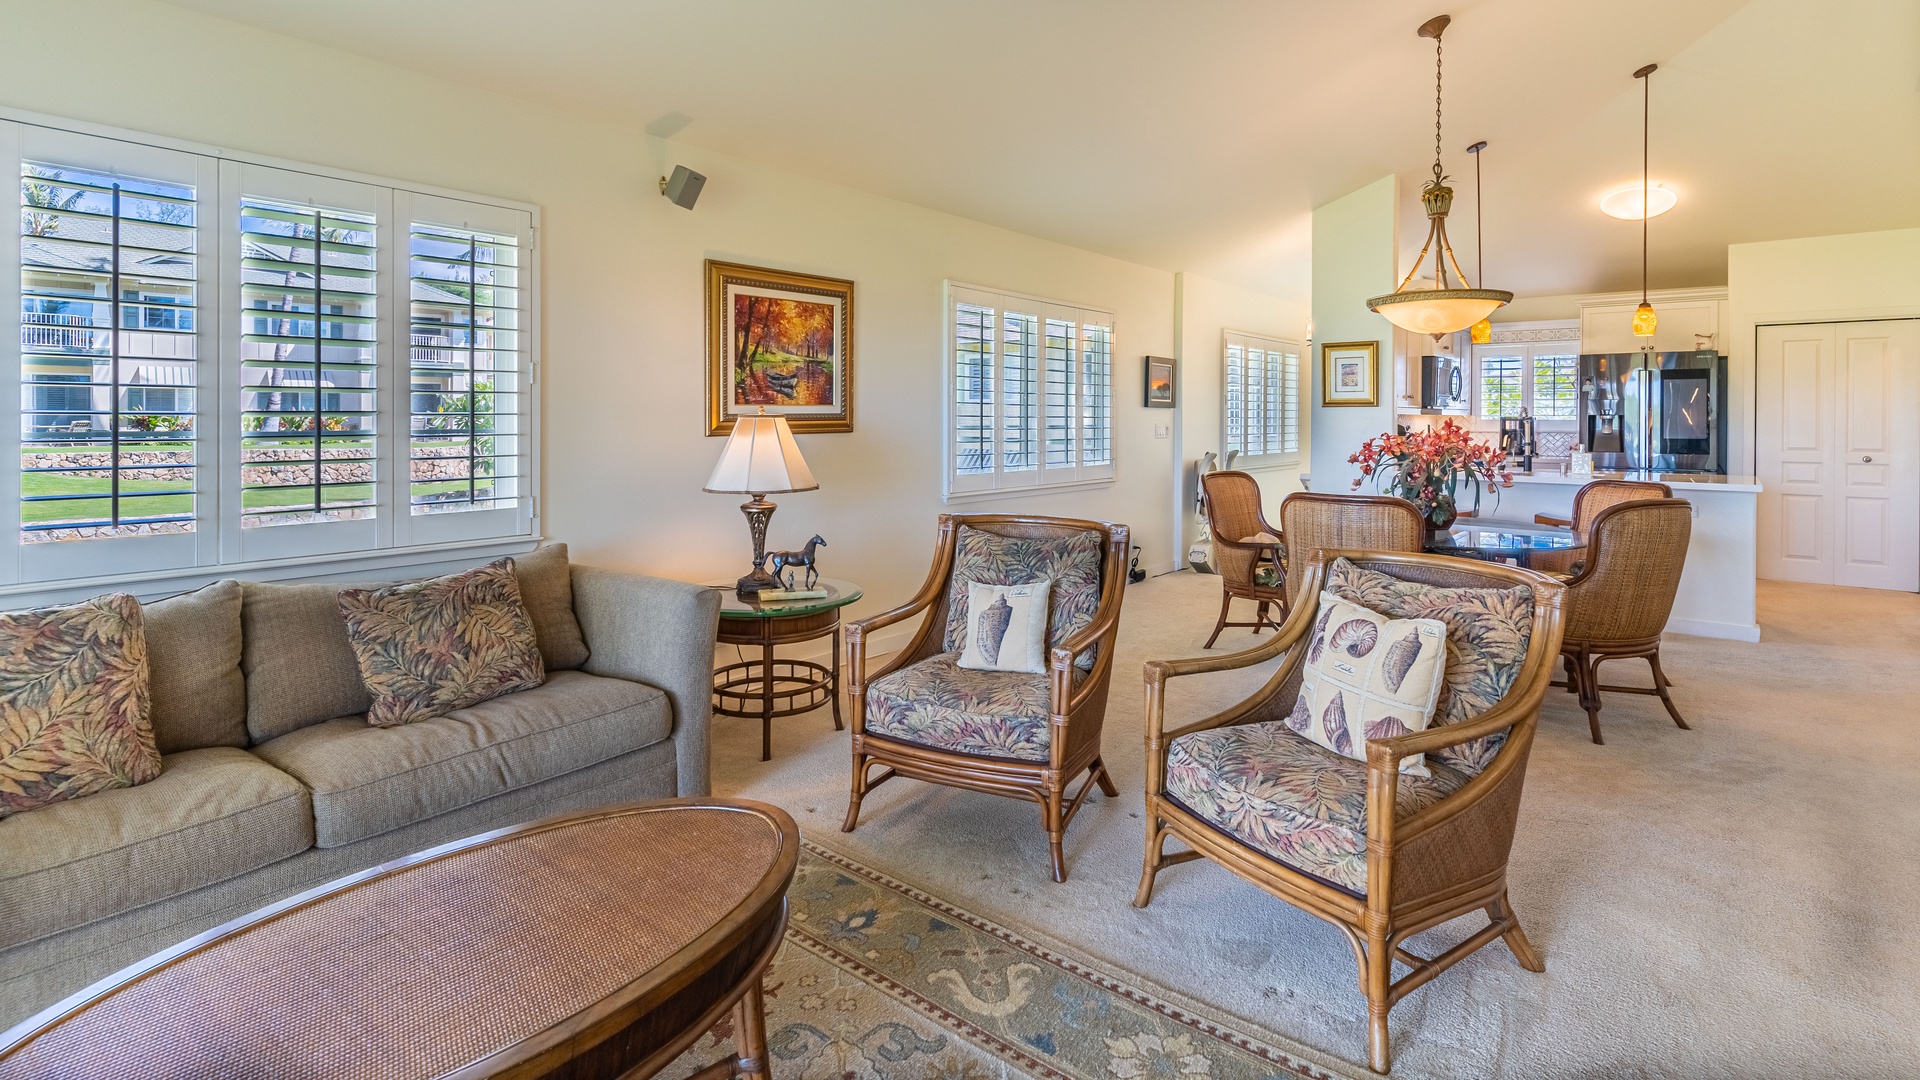 Kapolei Vacation Rentals, Kai Lani 20C - Sink in to the comfortable living area furnishings and rest on your vacation.